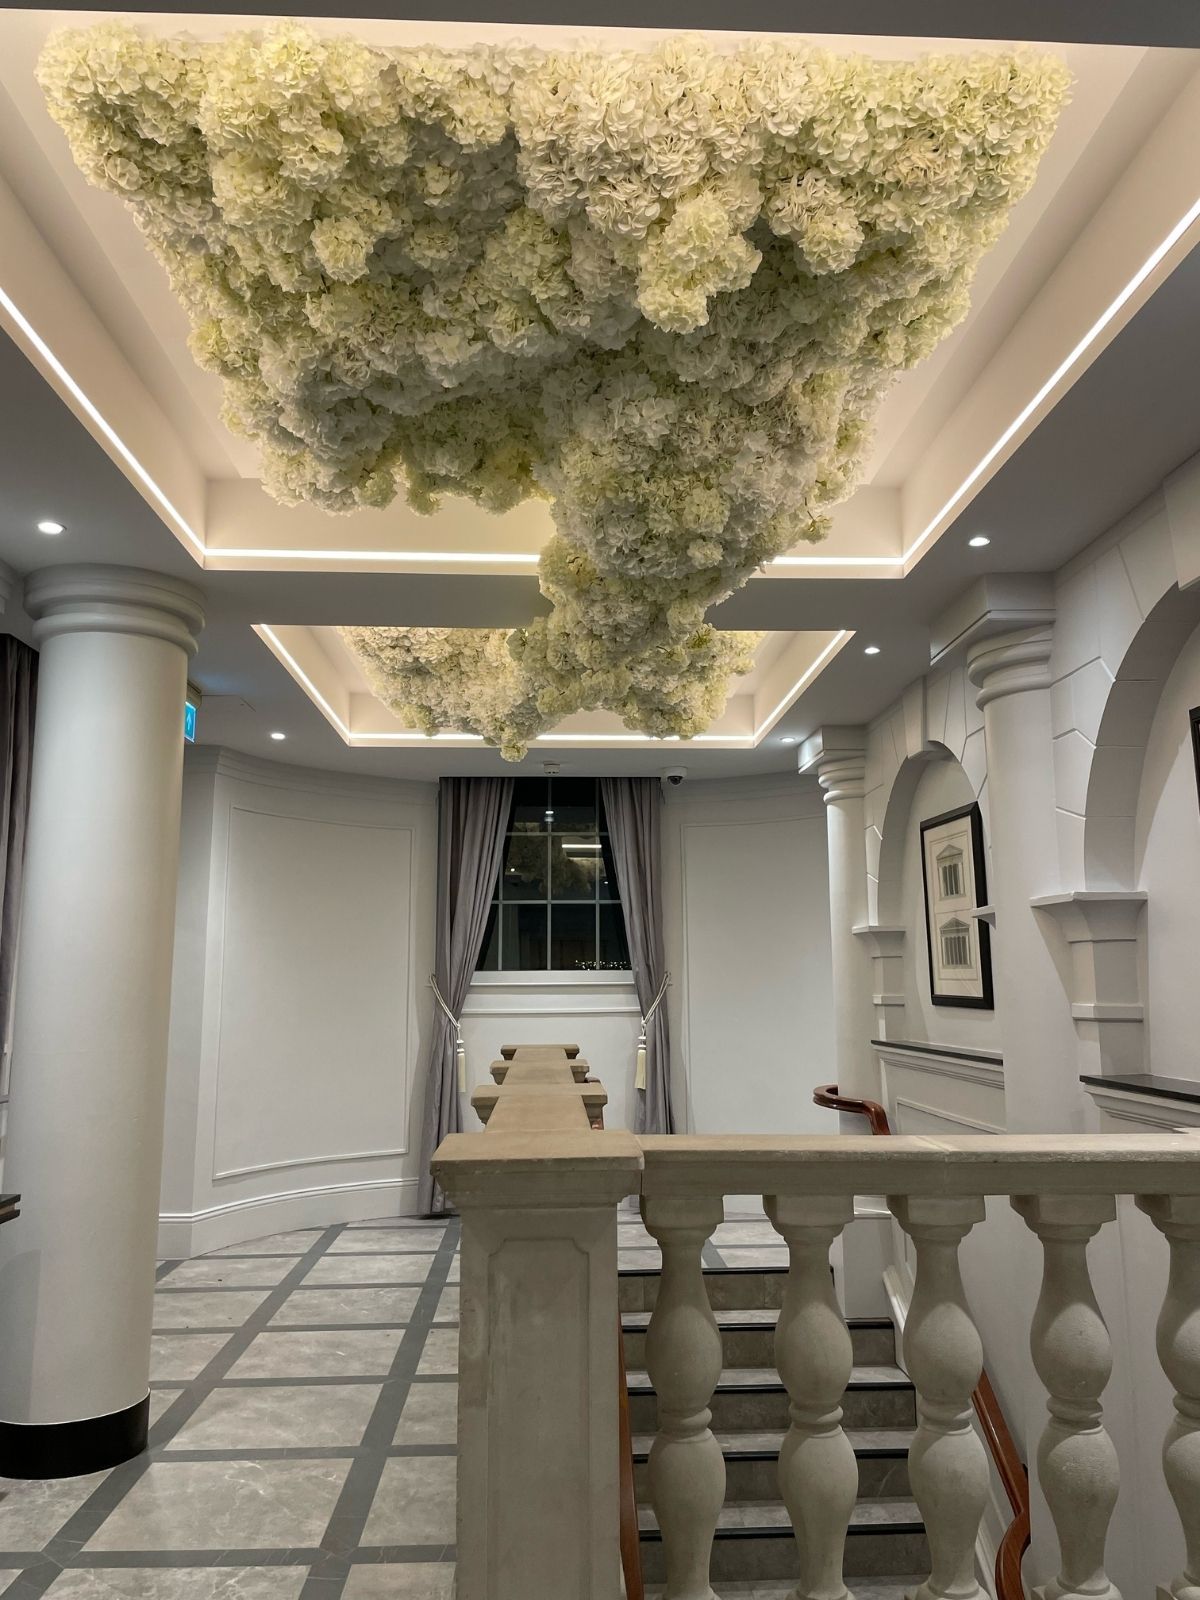 White Silk Hydrangeas from Pure Collection Jasaco at The Davenport Hotel by Joan Stam - on Thursd